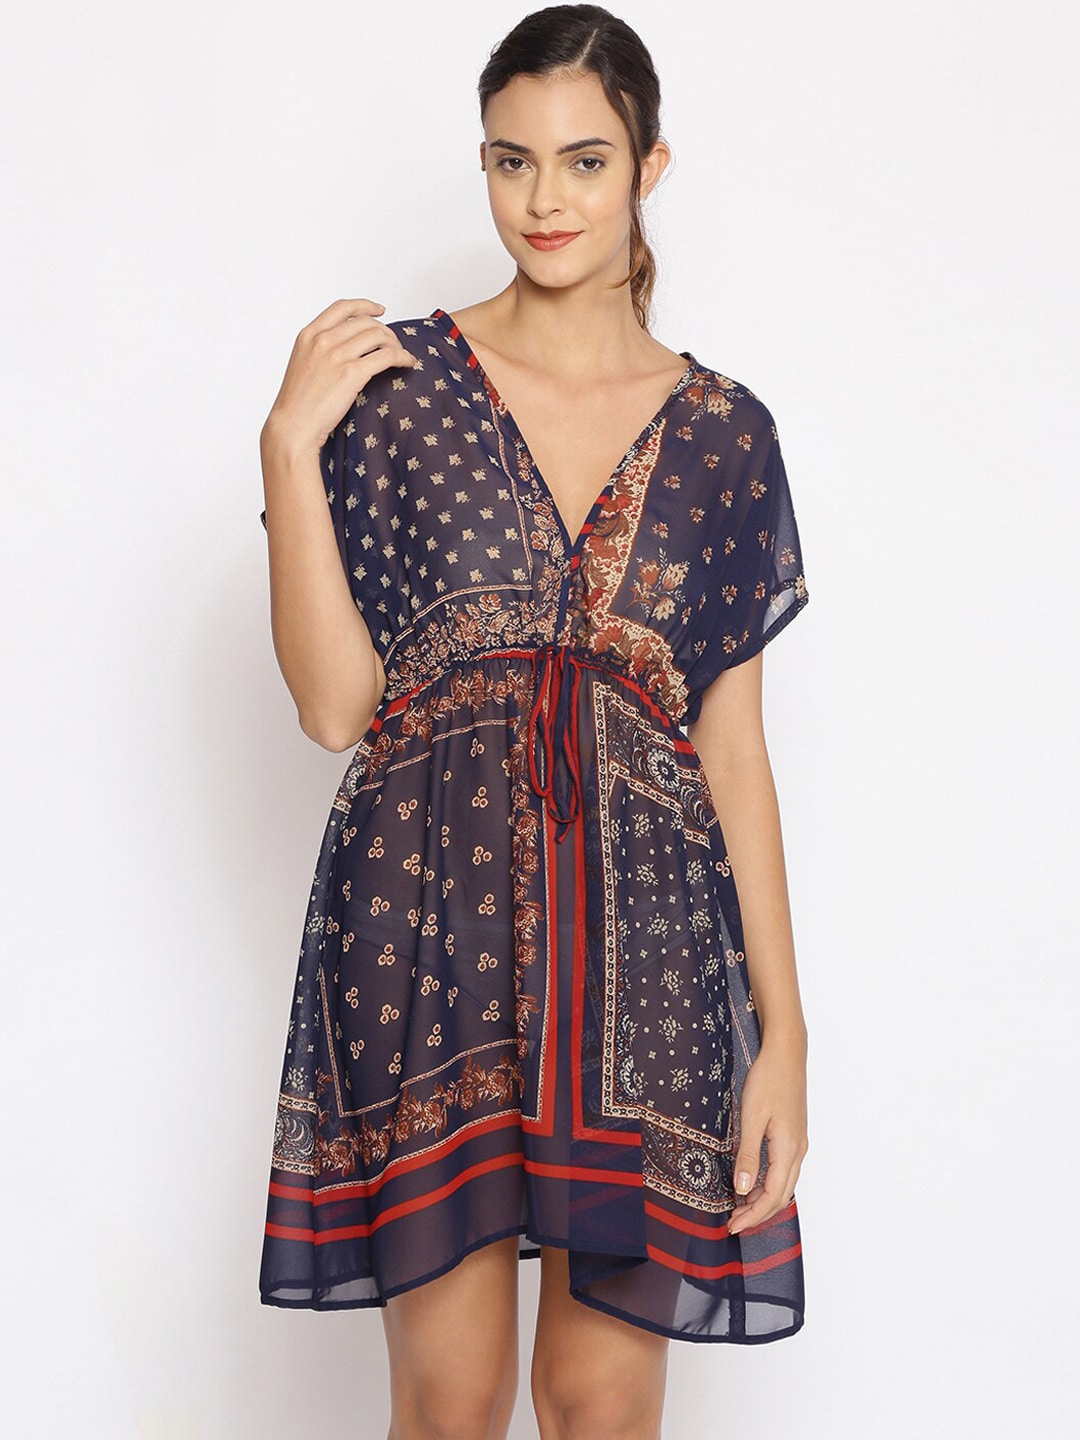 Oxolloxo Women Navy Blue & Brown Printed Cover-Up Swim Dress Price in India